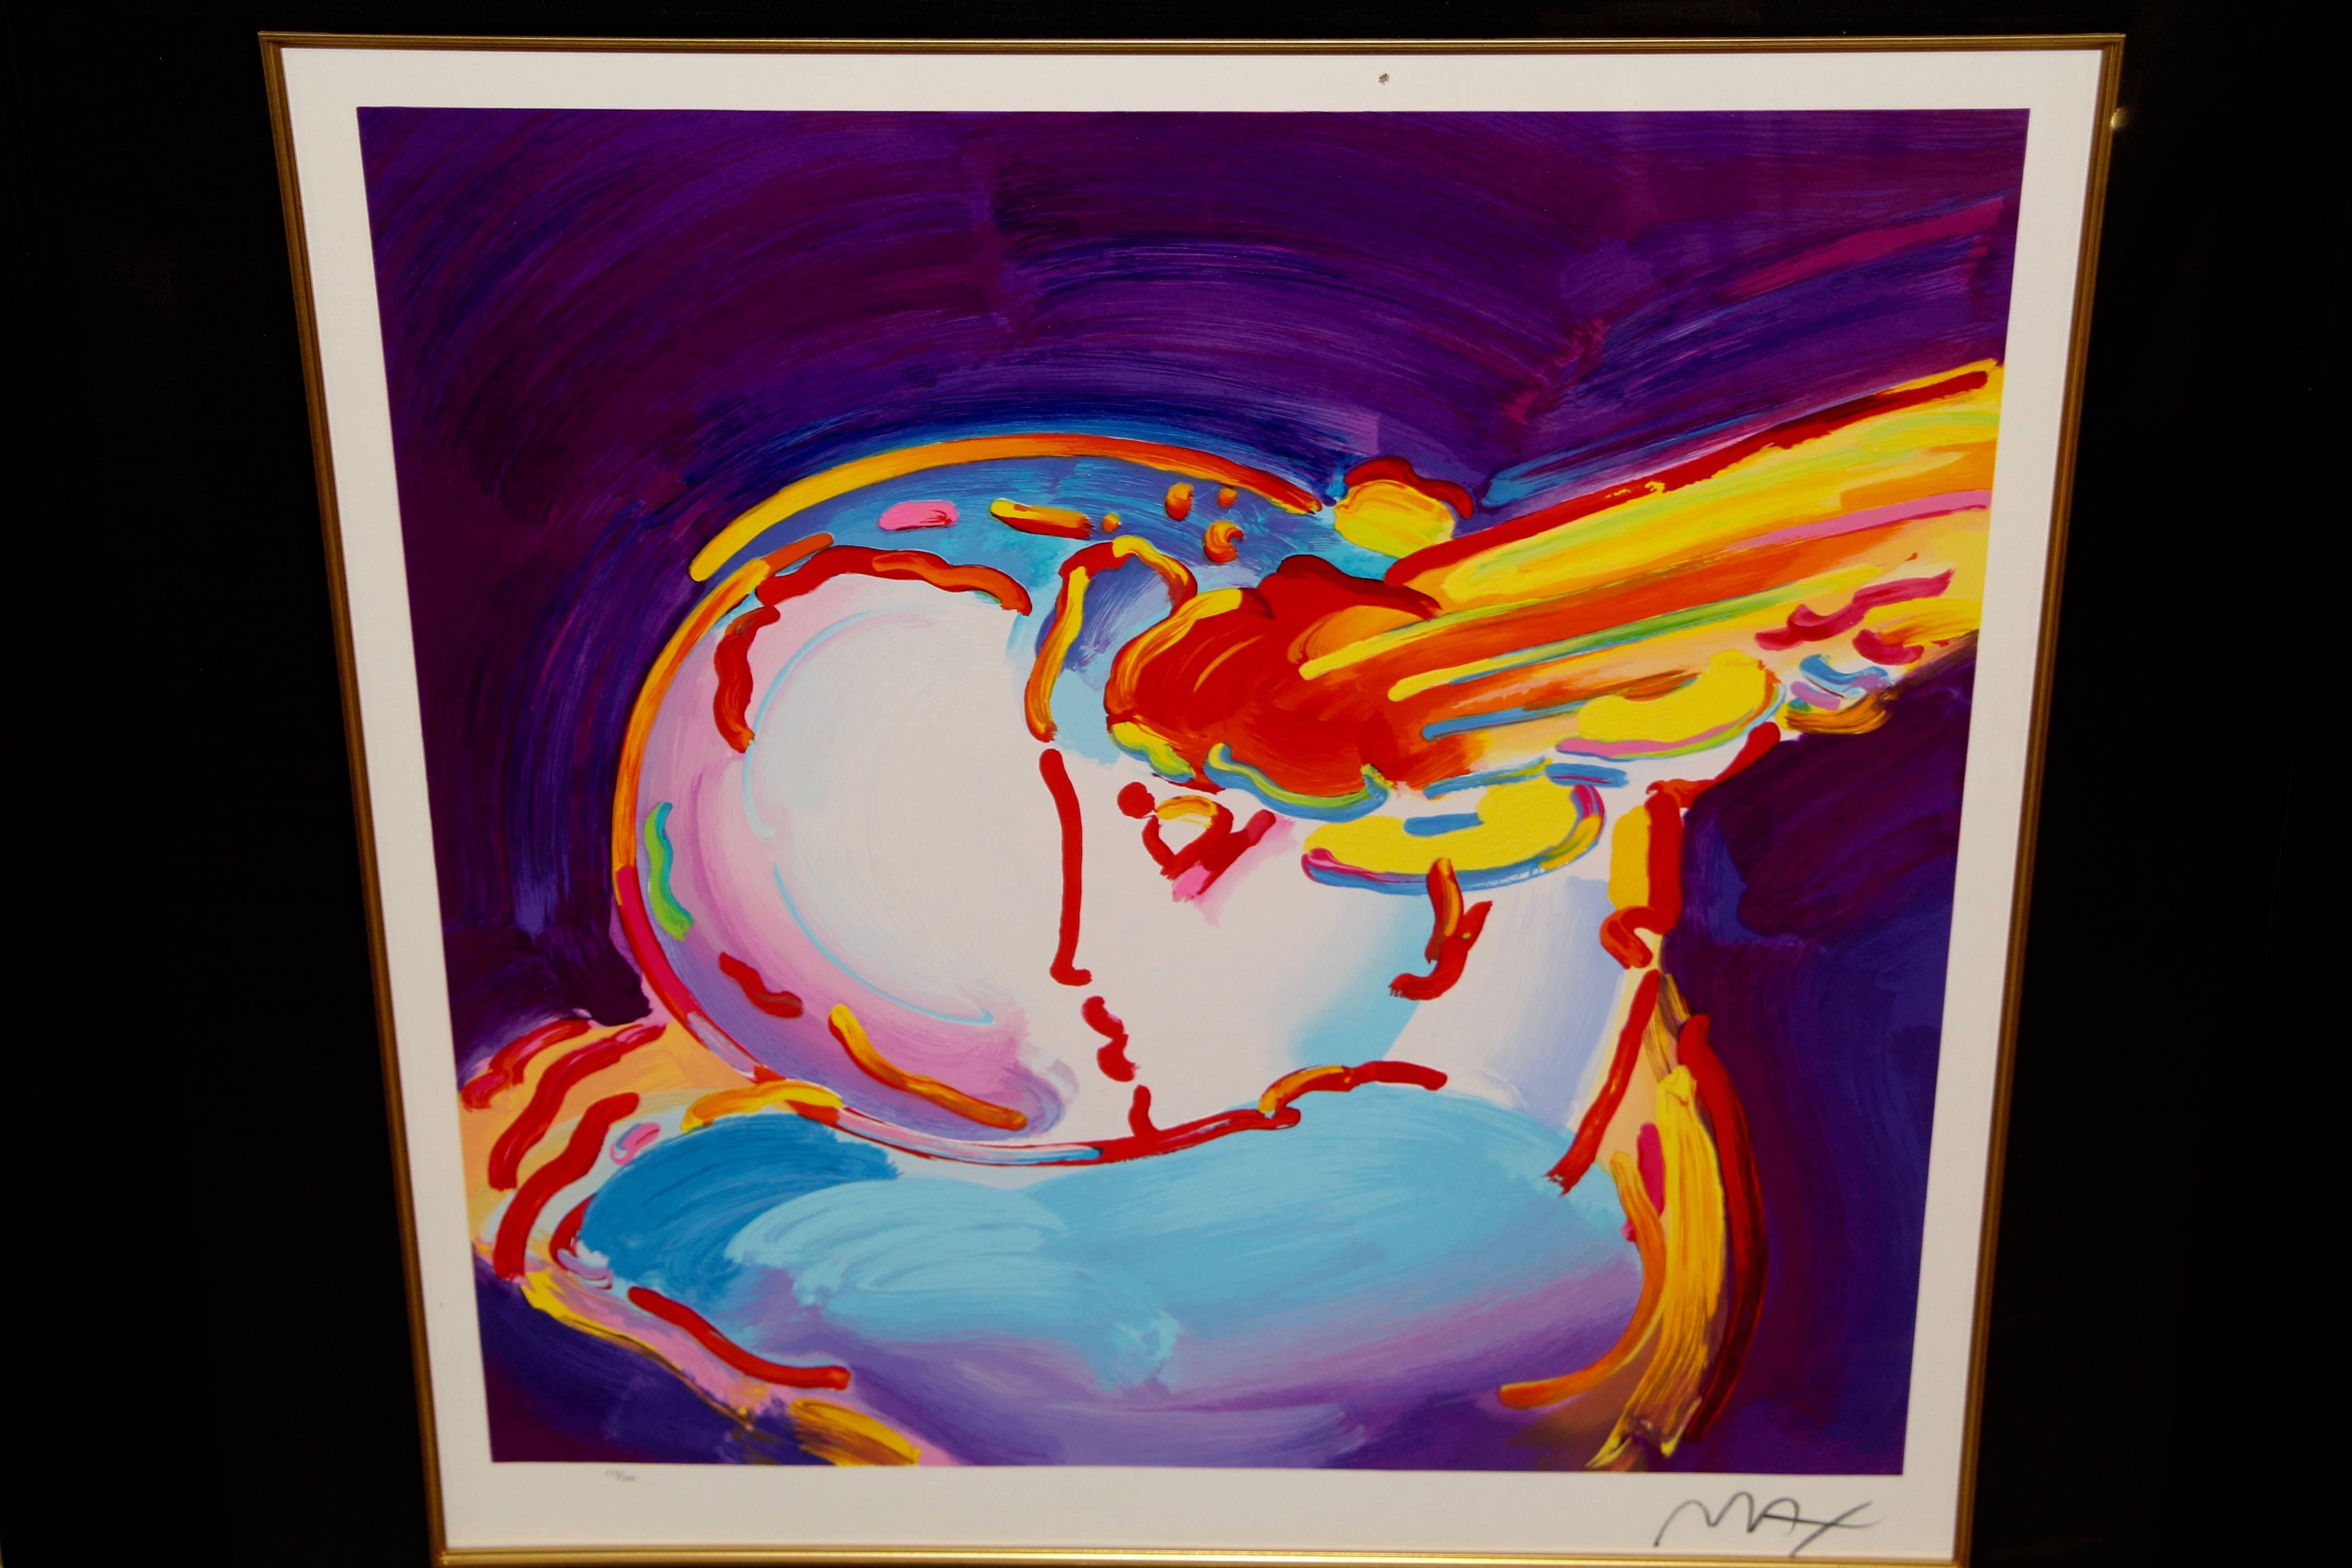 A beautiful serigraph by the noted pop artist Peter Max in a tastefully framed and matted way. It is signed and titled on the back label. It does appear to have some brush strokes on it, although I imagine that is how his serigraphs are executed. It